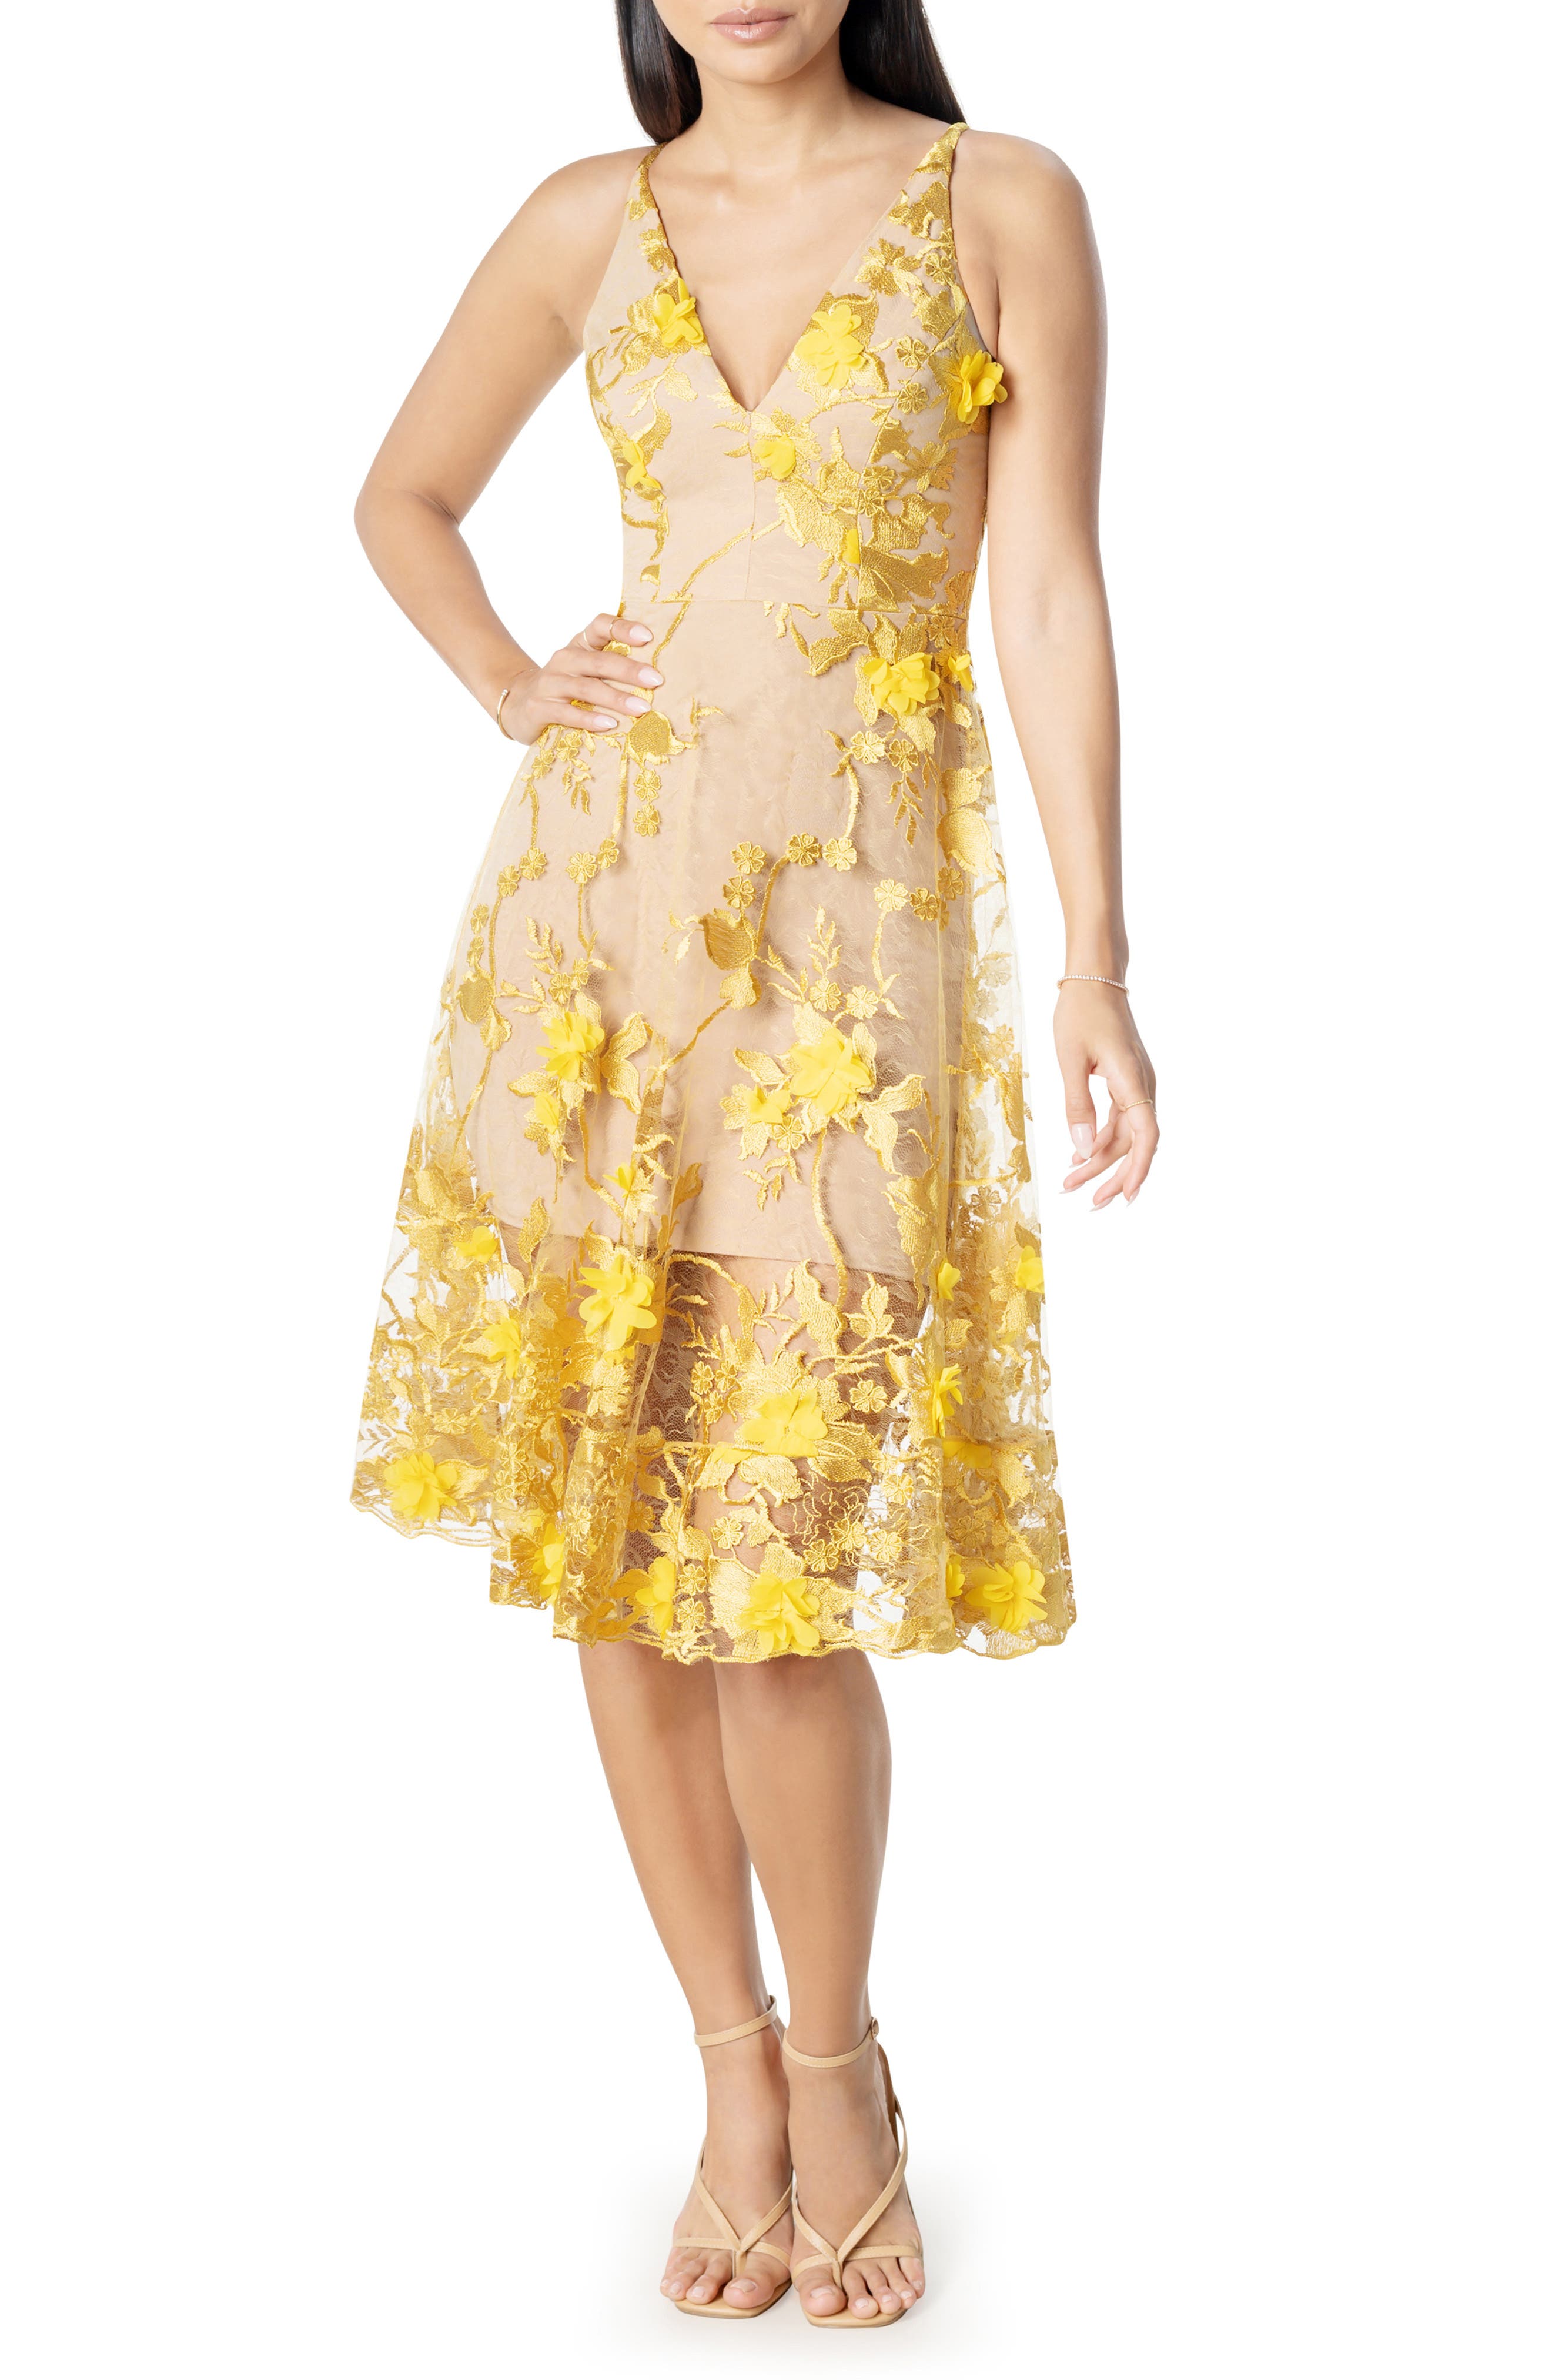 Yellow Cocktail Dresses ☀ Party Dresses ...